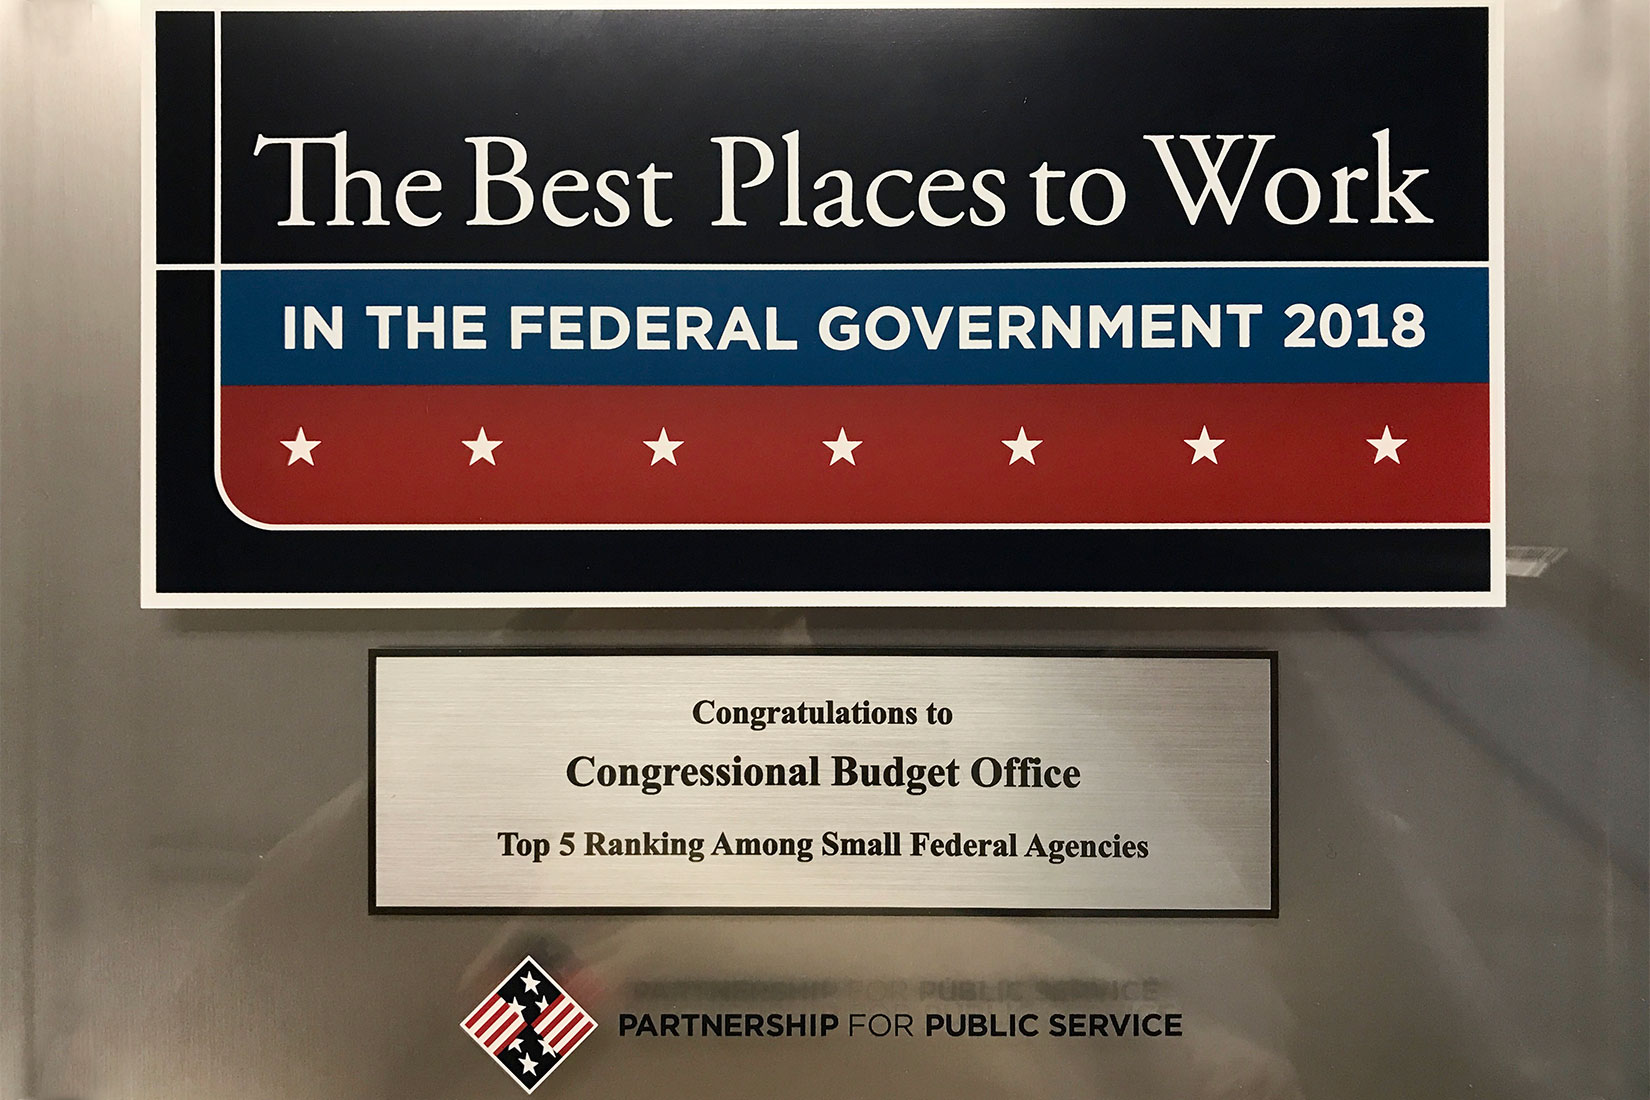 CBO ranked as one of the best places to work in the federal government